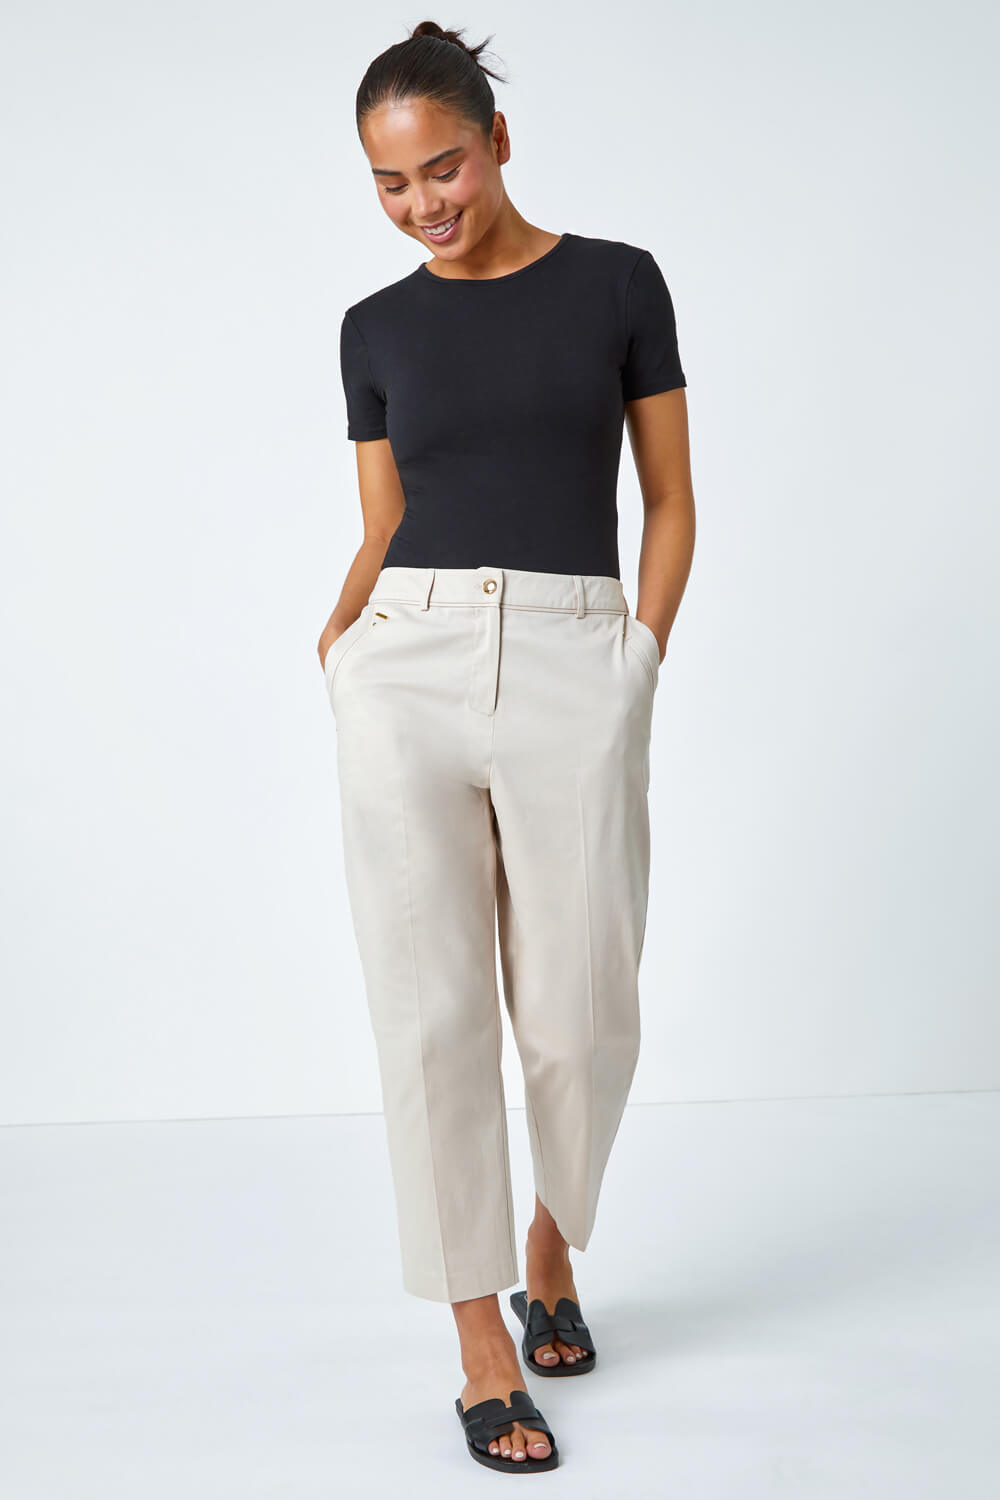 Stone Petite Cotton Blend Stretch Trousers, Image 2 of 5